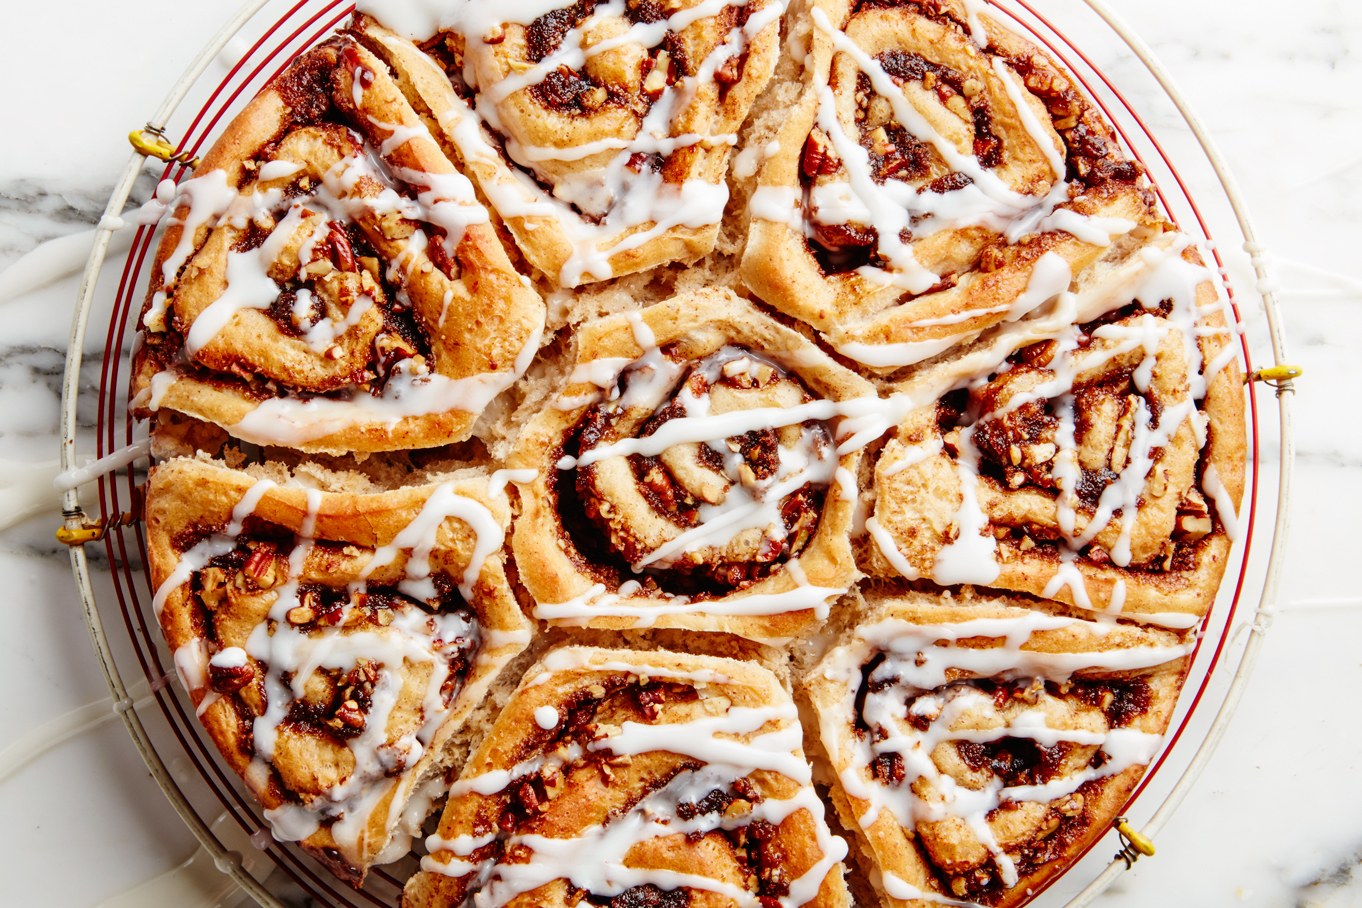 🥞 Sorry, Only Real Foodies Have Eaten at Least 17/24 of These Delicious Brunch Foods Cinnamon Rolls